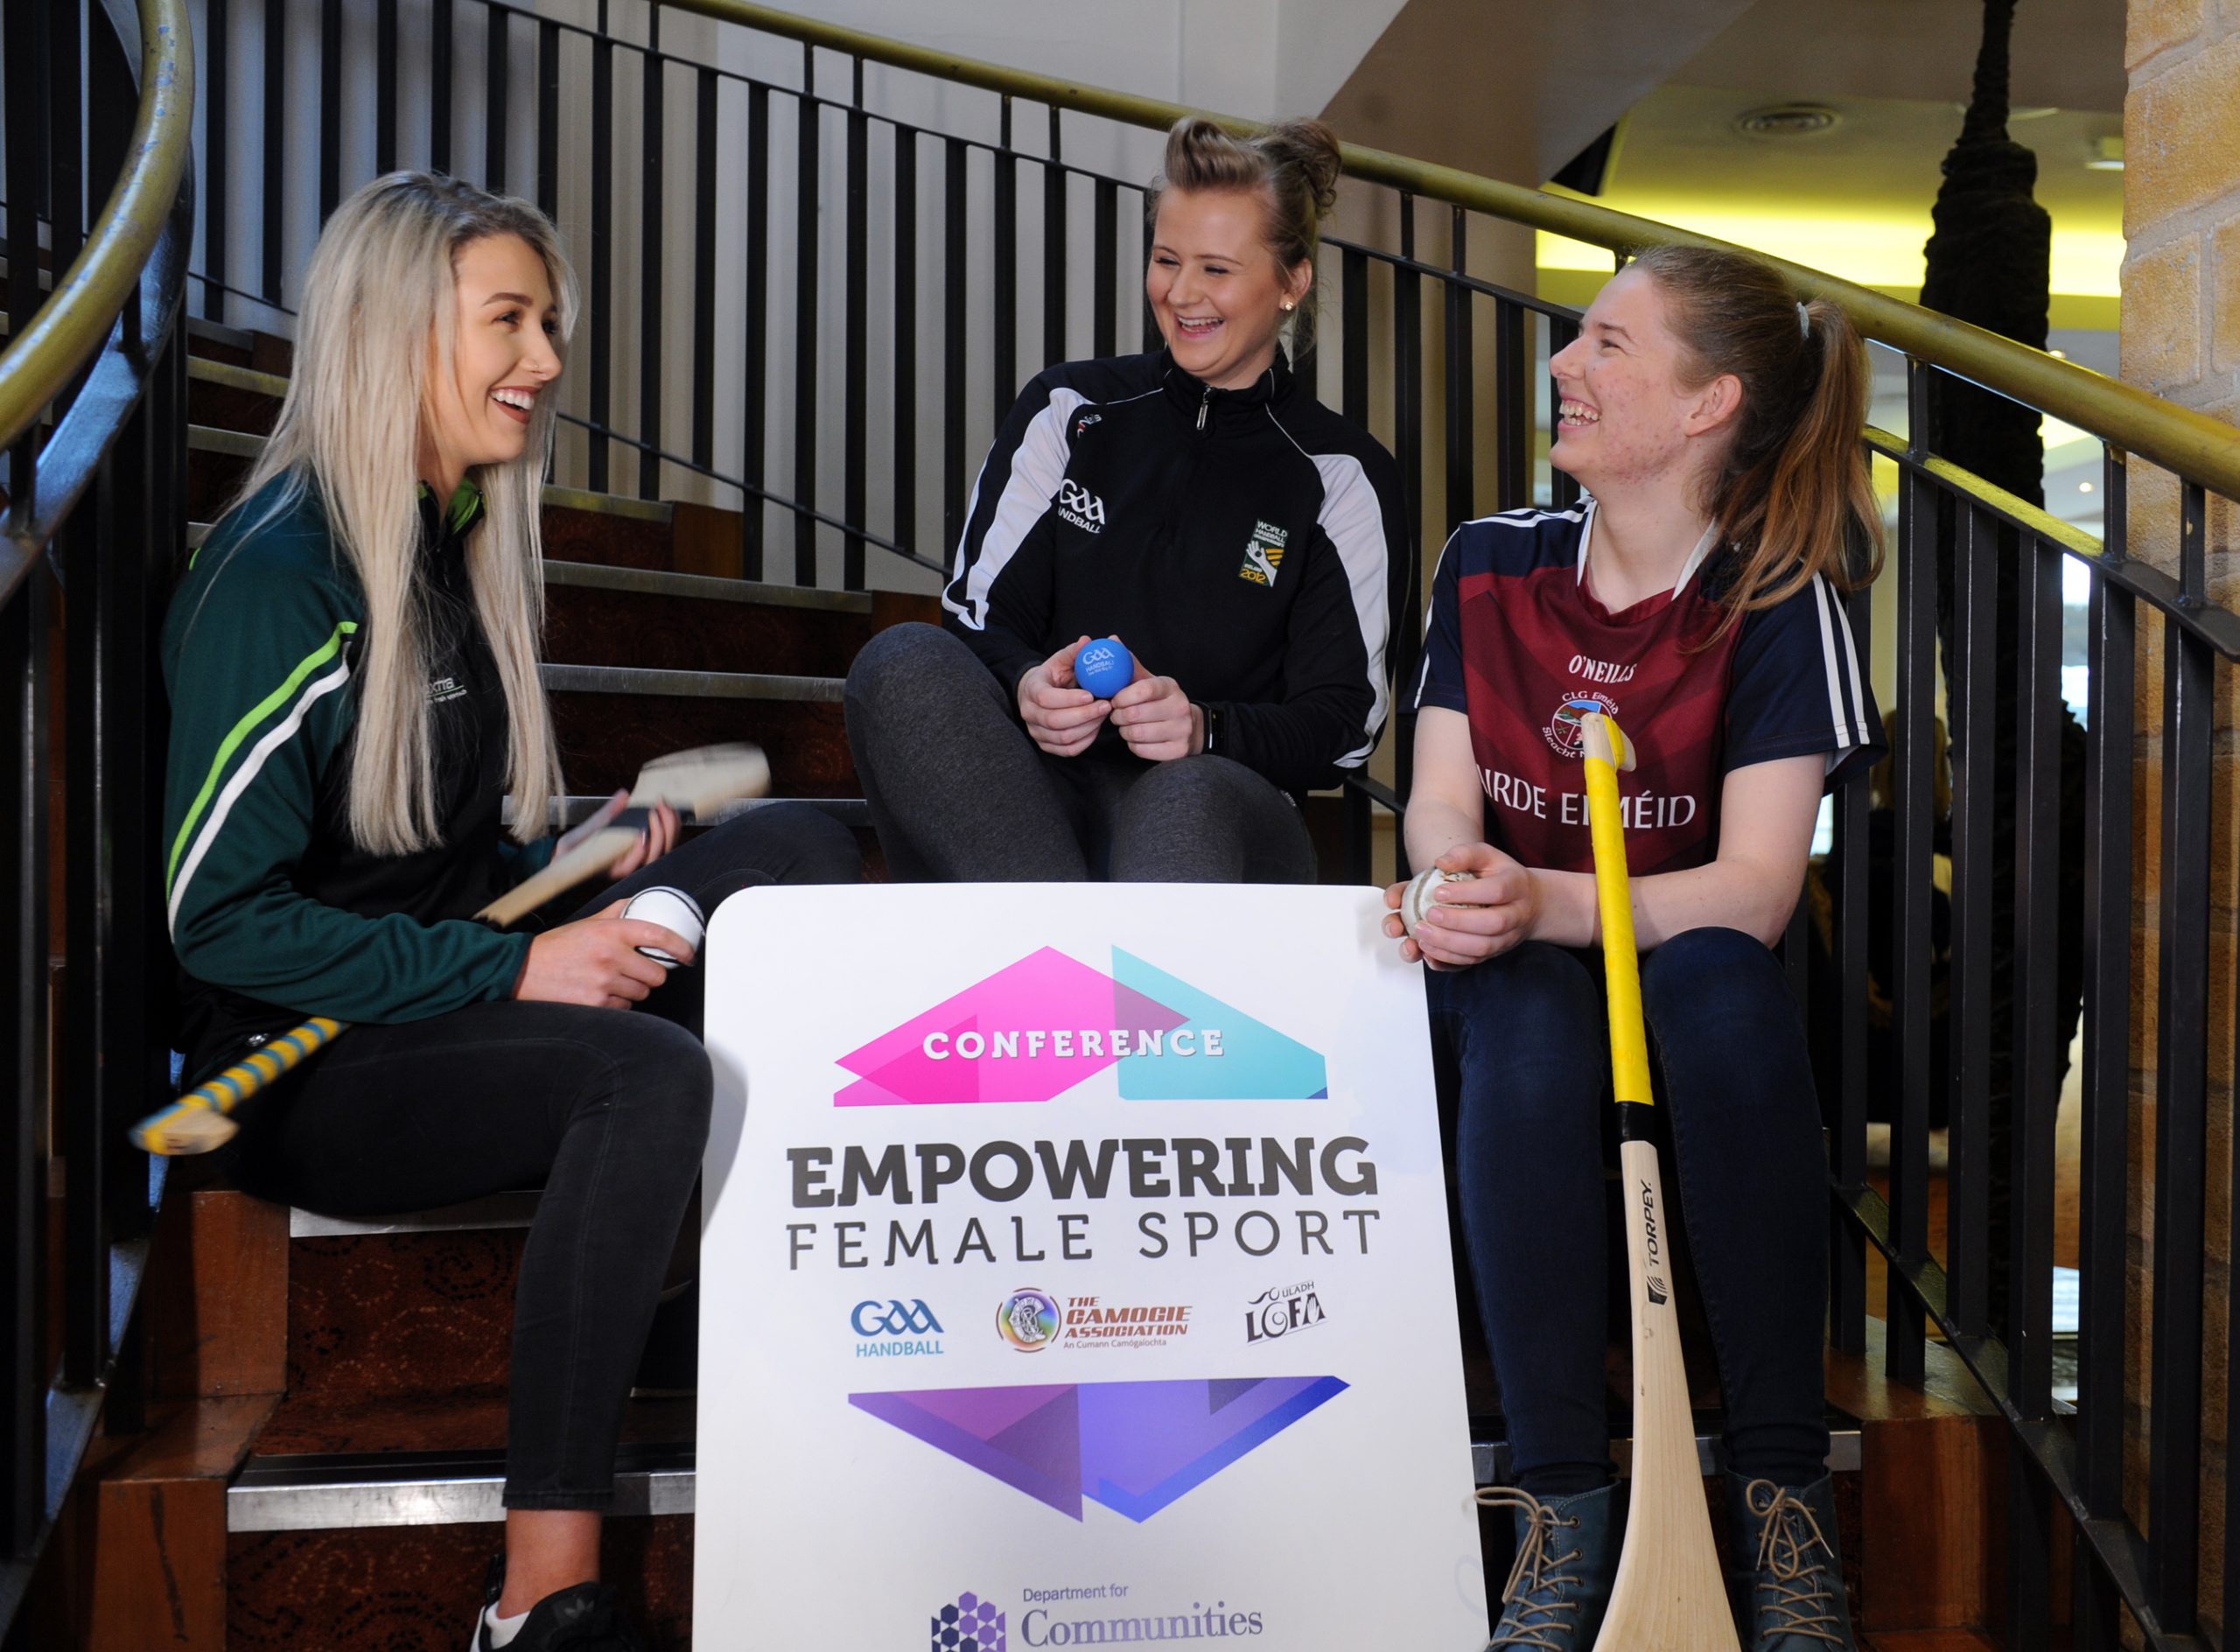 Launch of Empowering Female Sport Conference